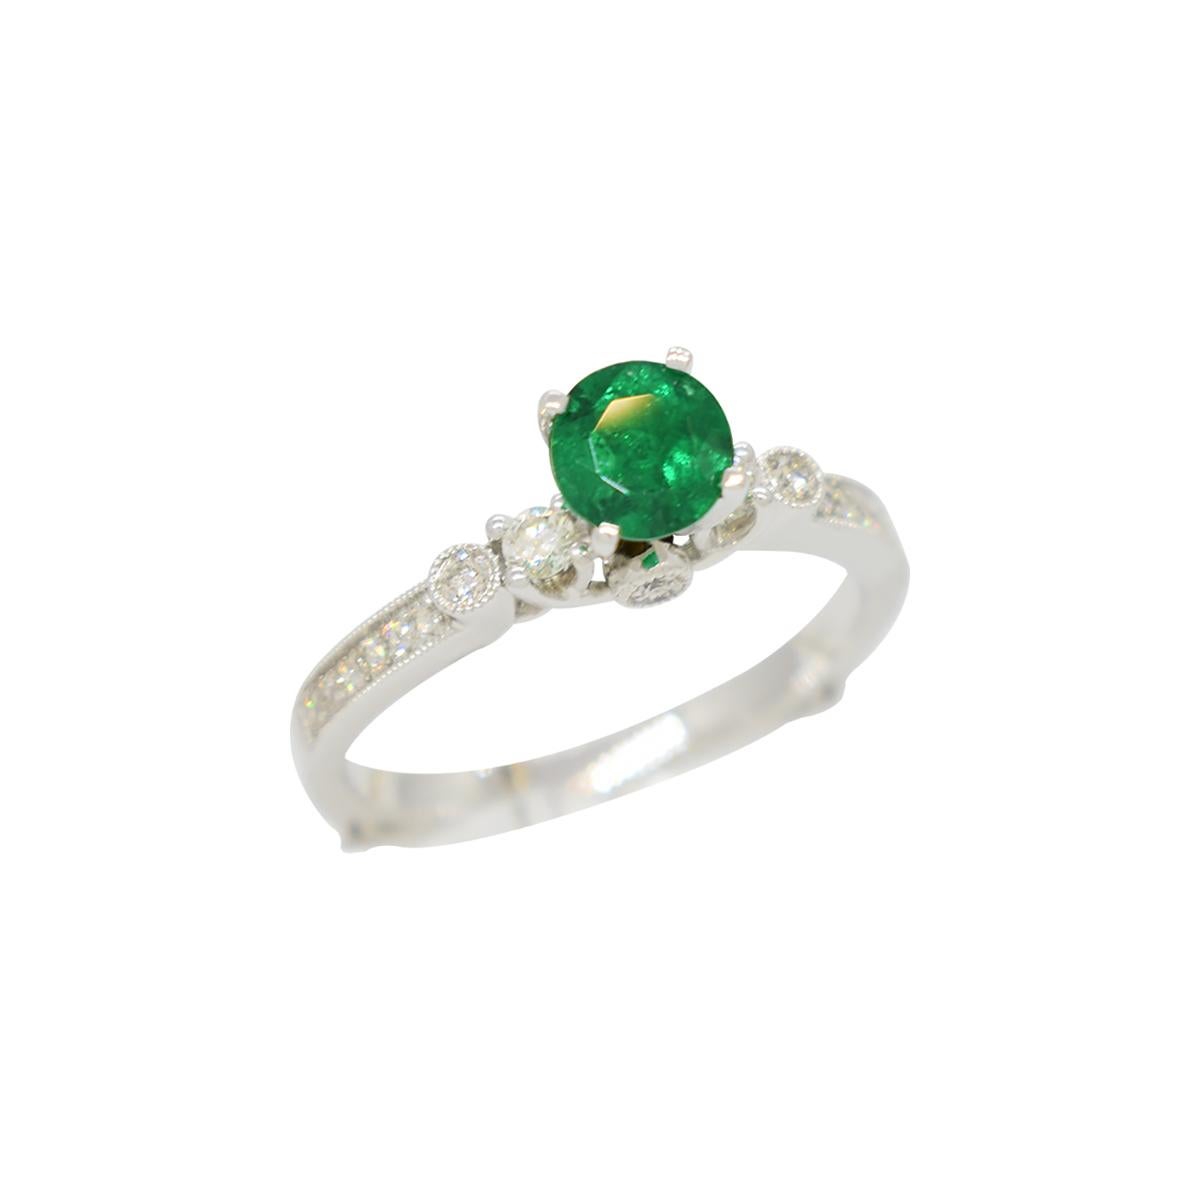 14K white gold diamond and emerald ring with 0.50 carats round cut genuine natural Colombian emerald set in prongs and 20 round cut diamonds in 0.39 carats, total weight, set in fine micro pave.  

All the fine details around the diamonds, the thin